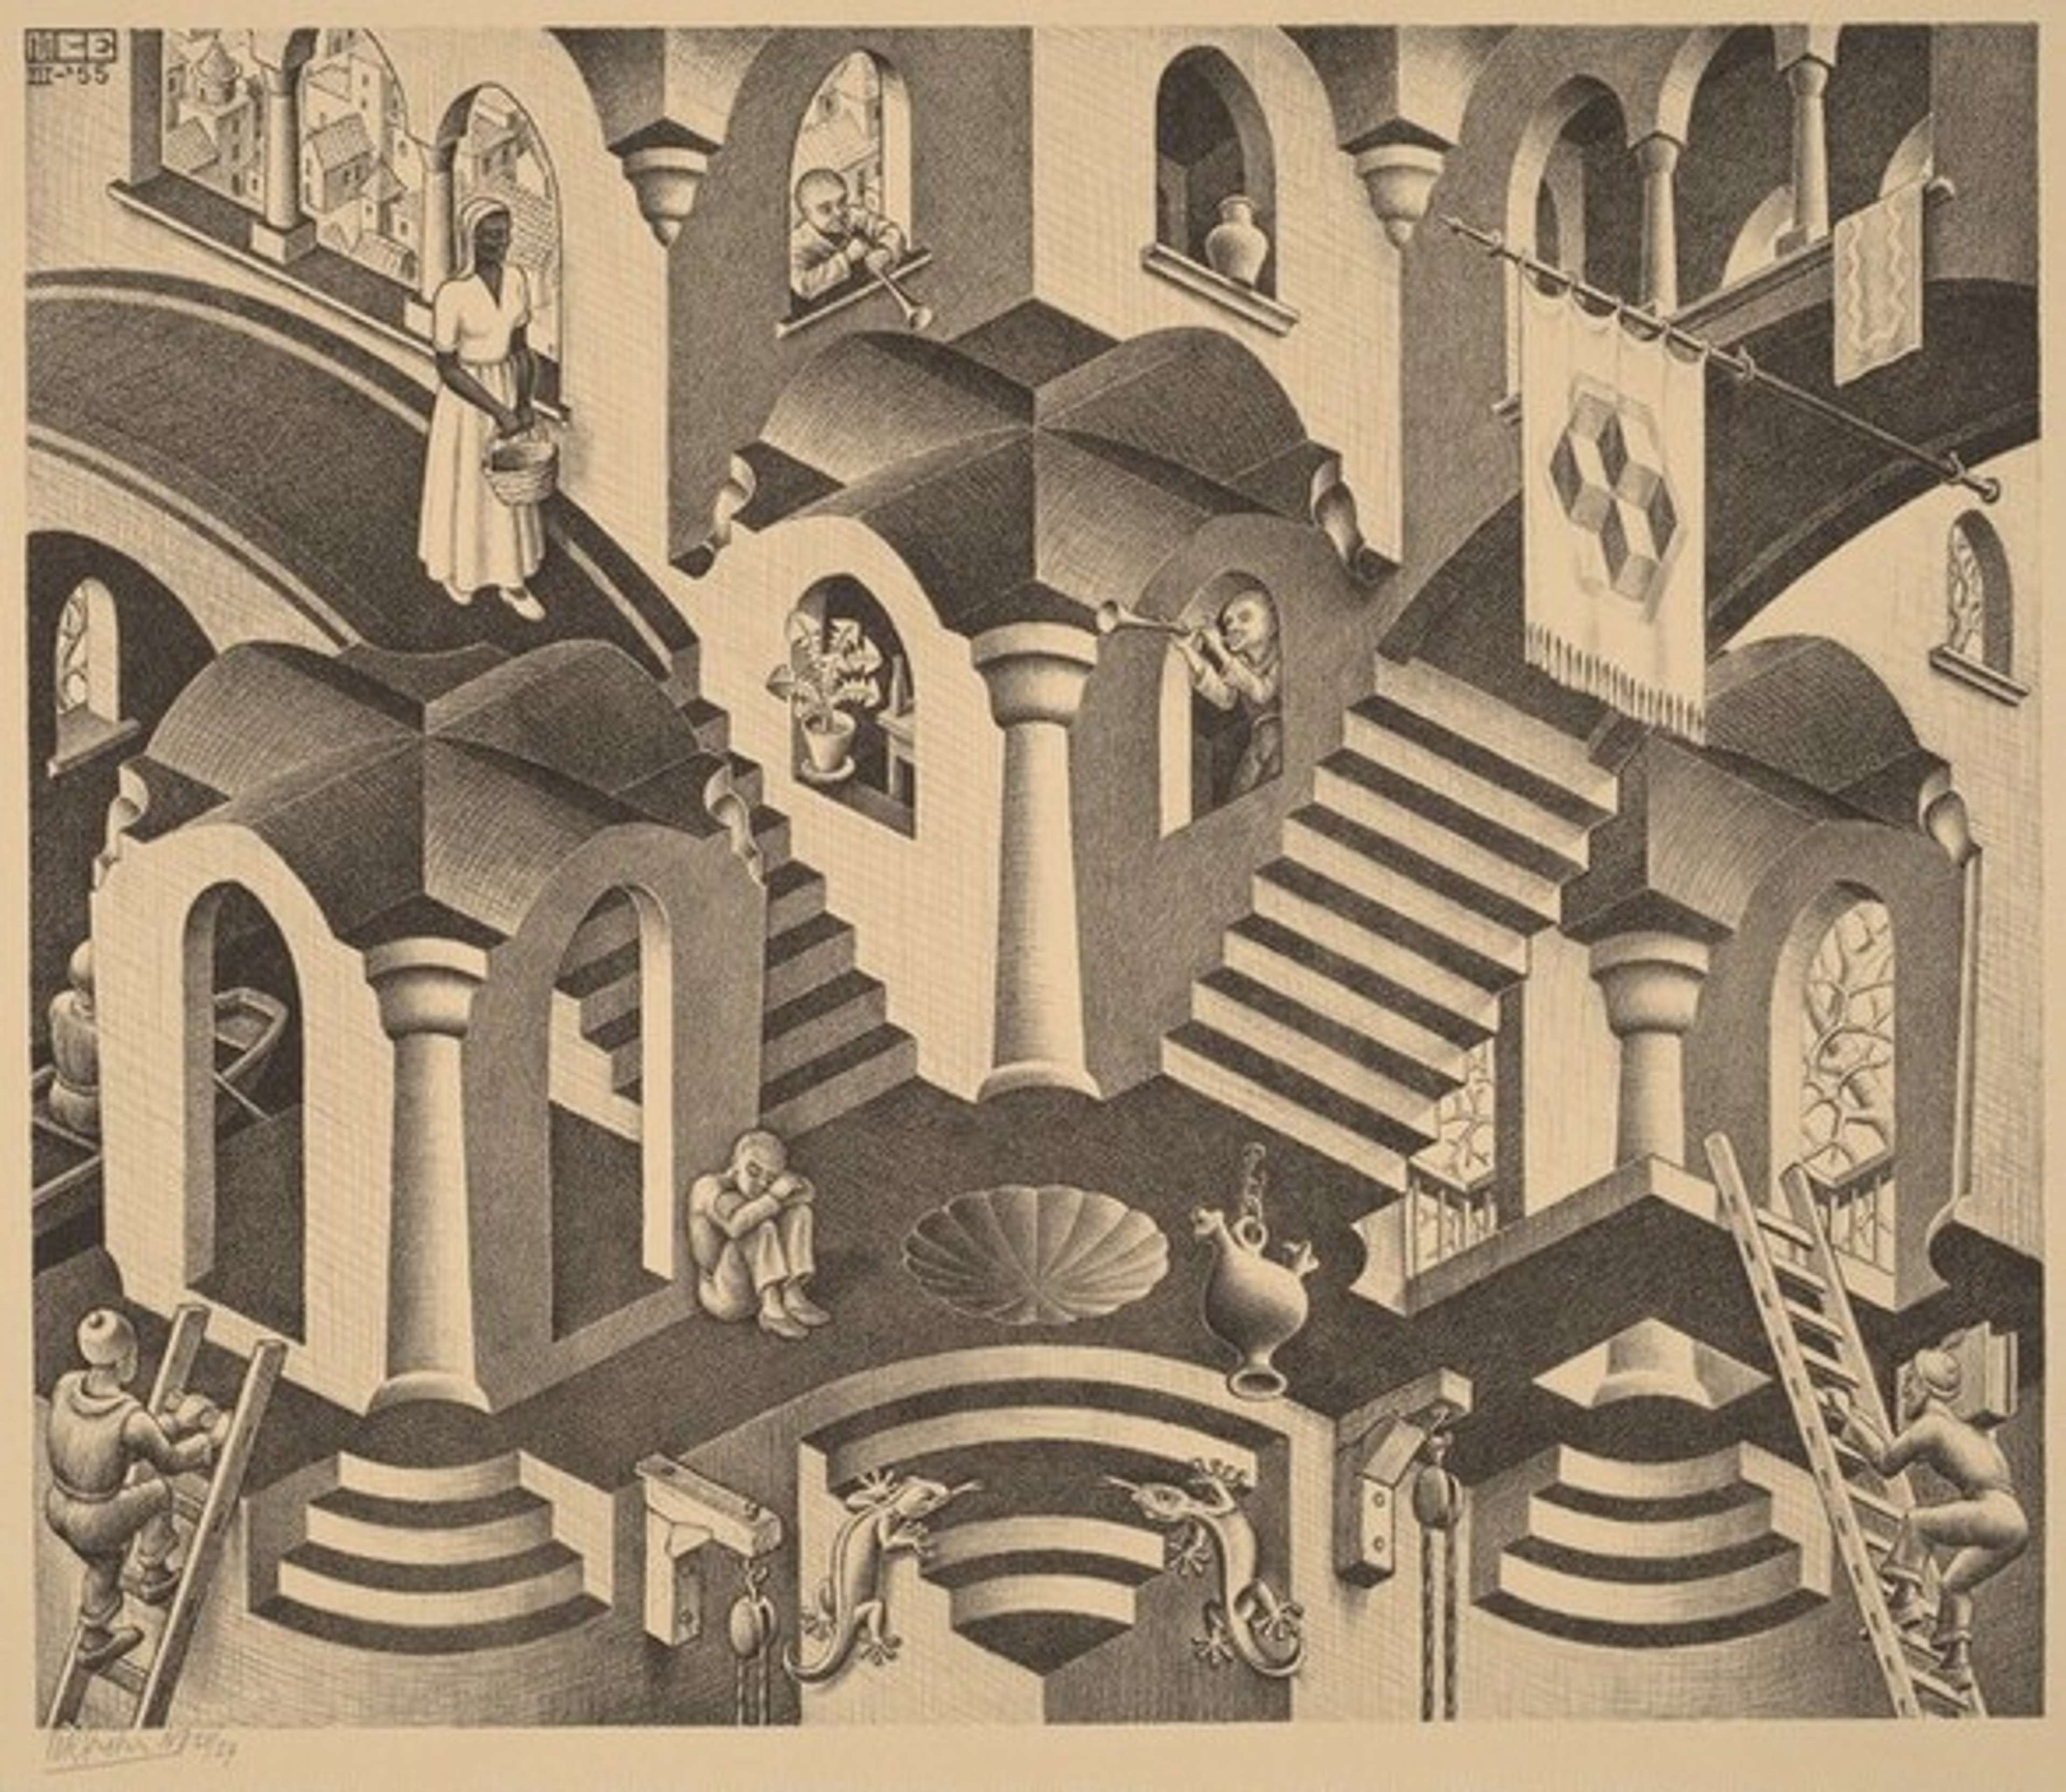 A lithograph print titled "Convex and Concave" by M.C. Escher. The artwork features interlocking shapes with a combination of convex and concave surfaces arranged in a repeating pattern, creating an optical illusion of depth and movement.